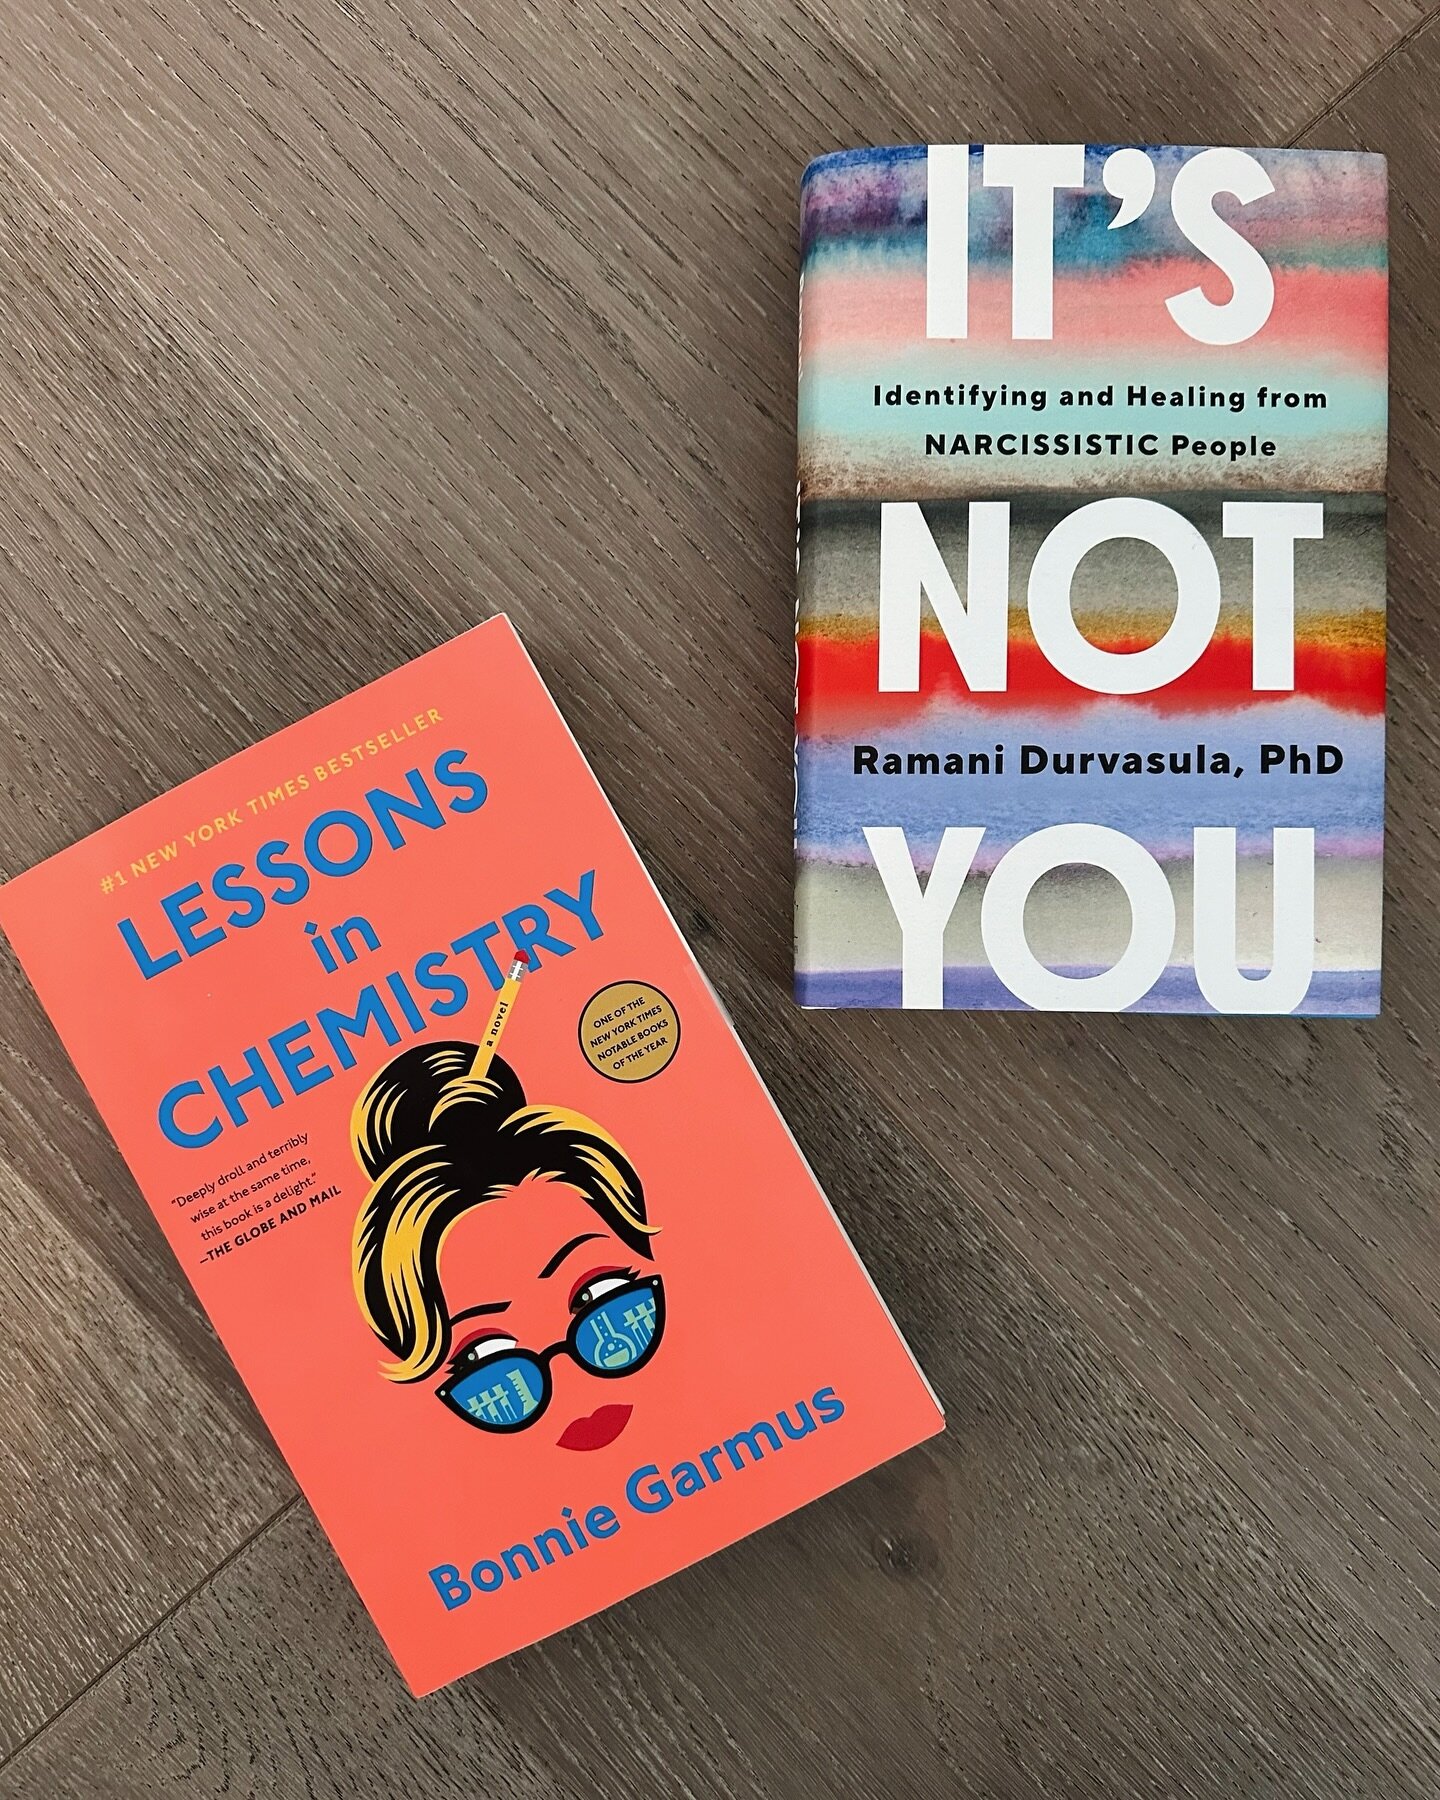 My current resource roundup 📖🎶📺🍴🍷📚

What I&rsquo;m reading: I love having a fiction and non-fiction going at the same time. It&rsquo;s all about balance people. 
📖 It&rsquo;s Not You &ndash; Identifying and Healing for Narcissistic People by R